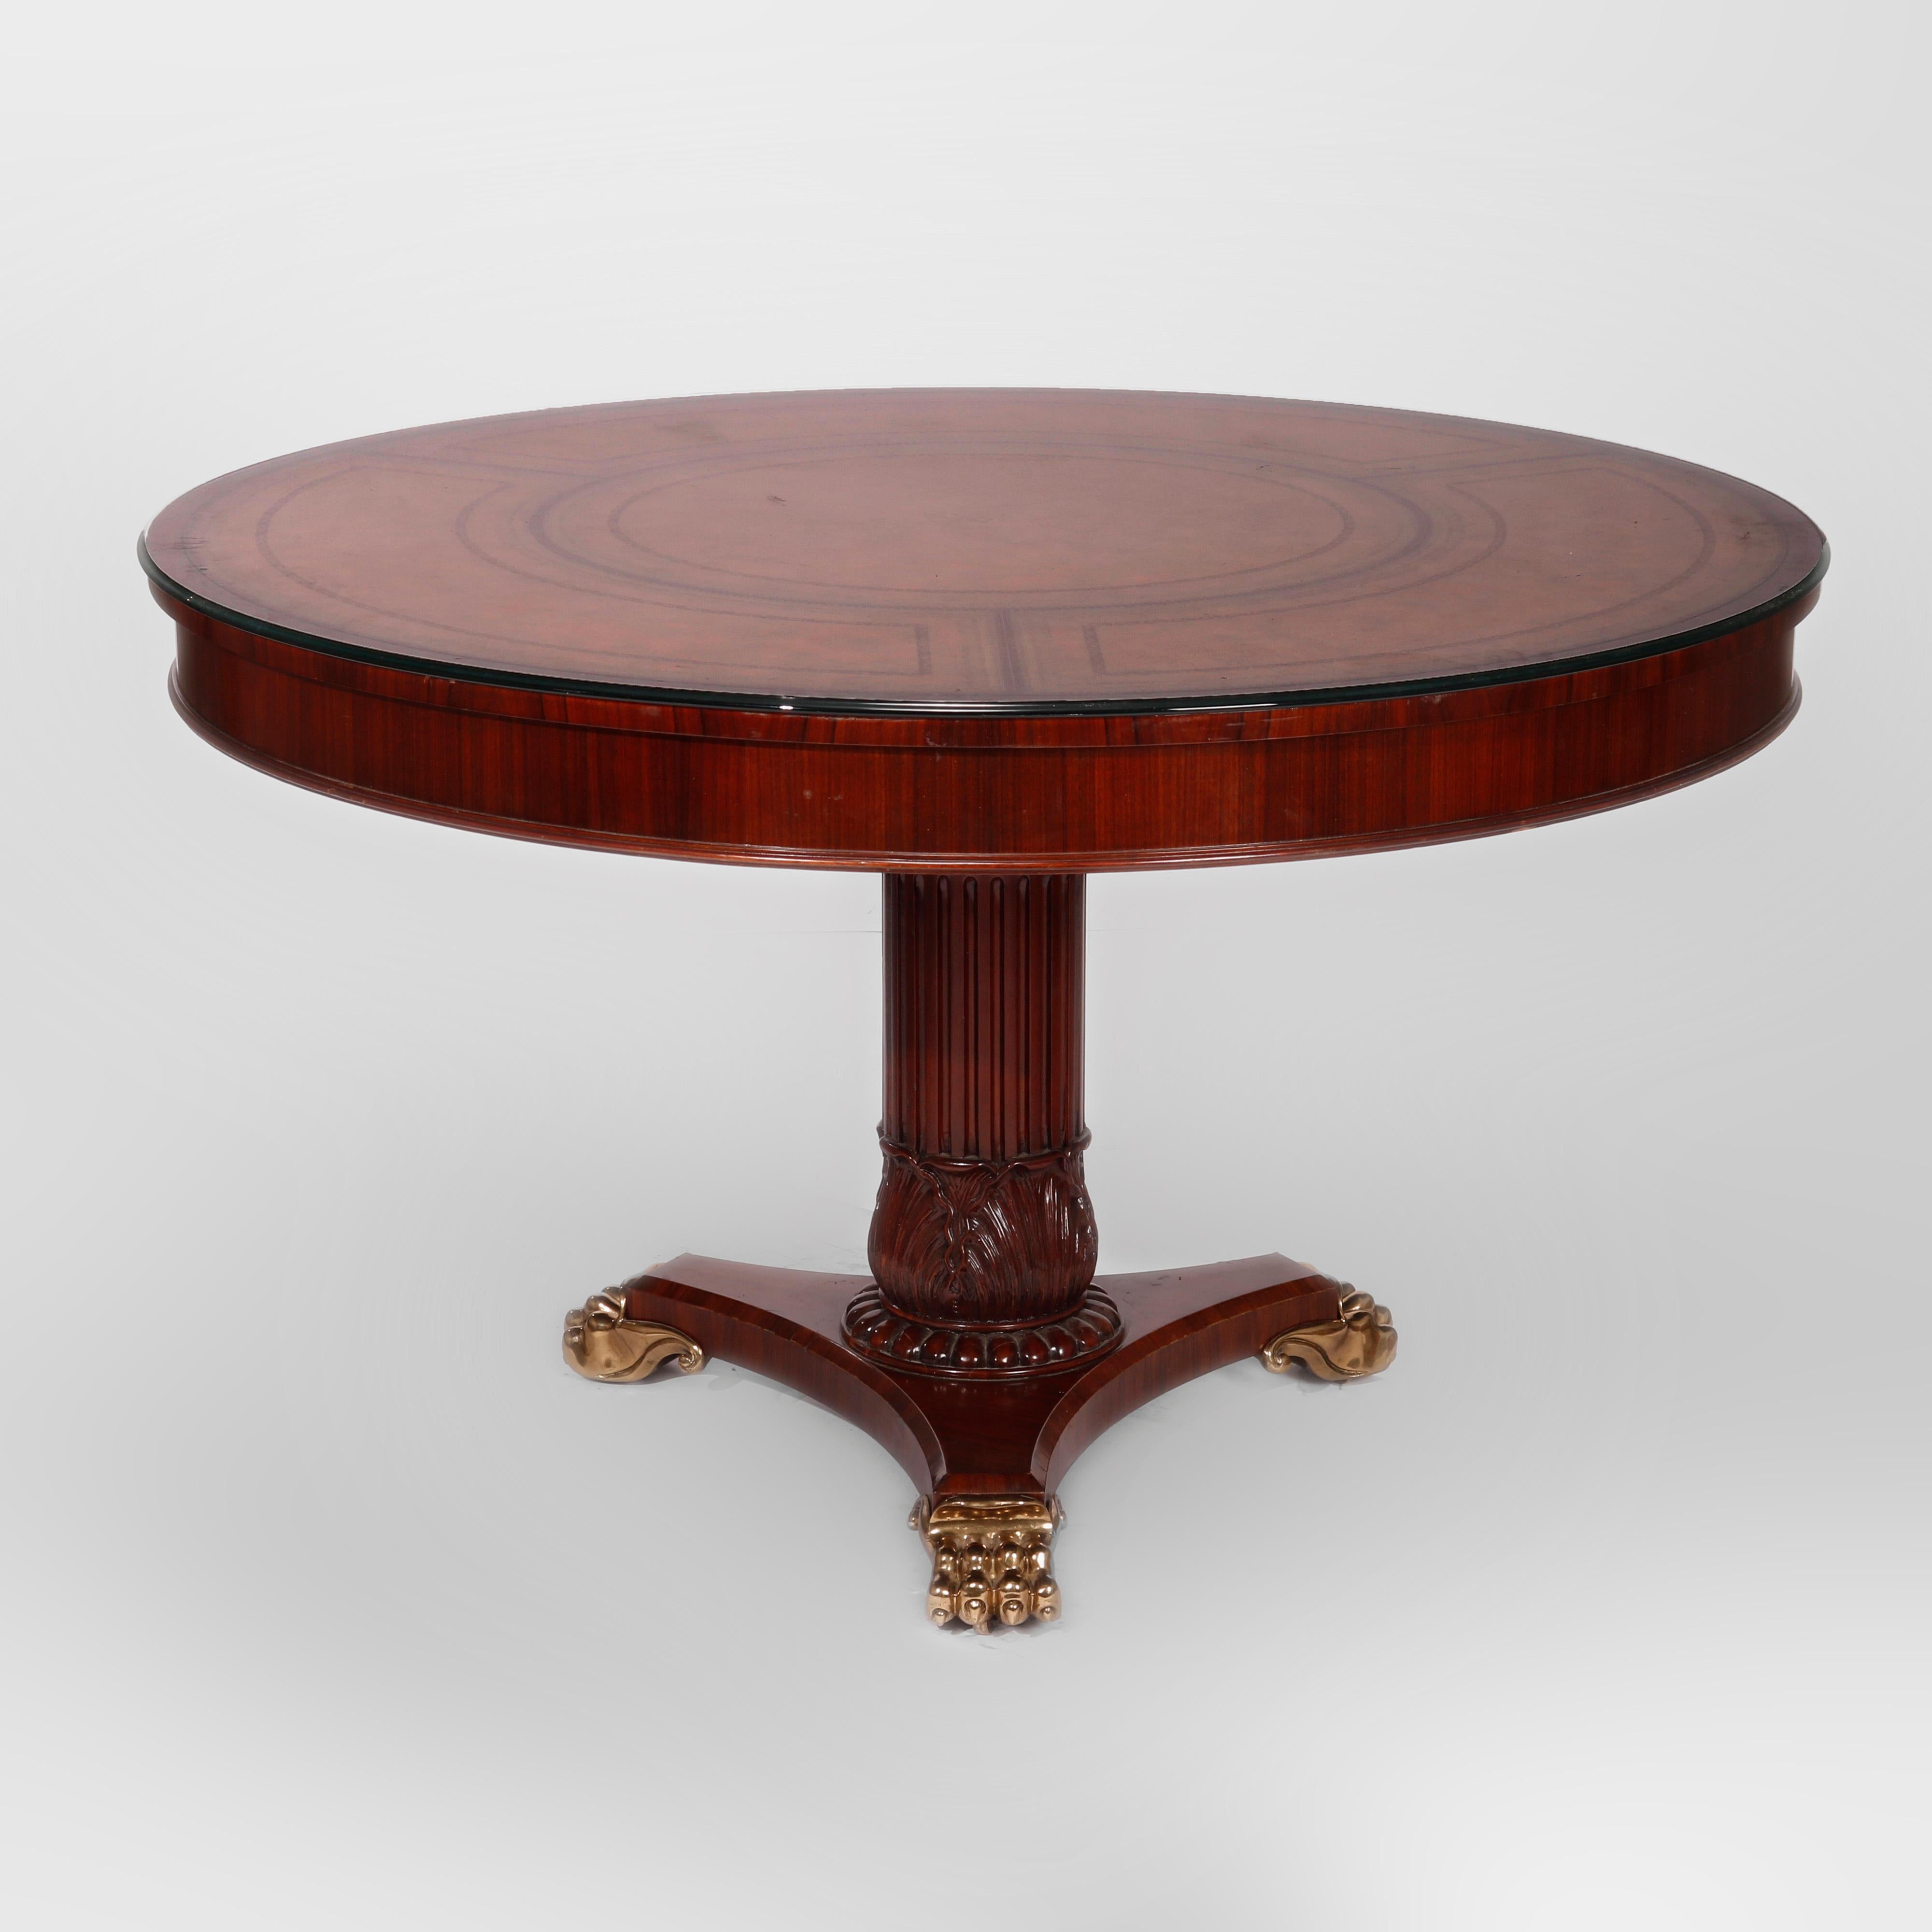 A neoclassical style center table by Maitland Smith offers rosewood and mahogany construction in circular form having tooled and gilt leather top over acanthus carved pedestal, raised on cast brass paw feet, maker label as photographed, 20th